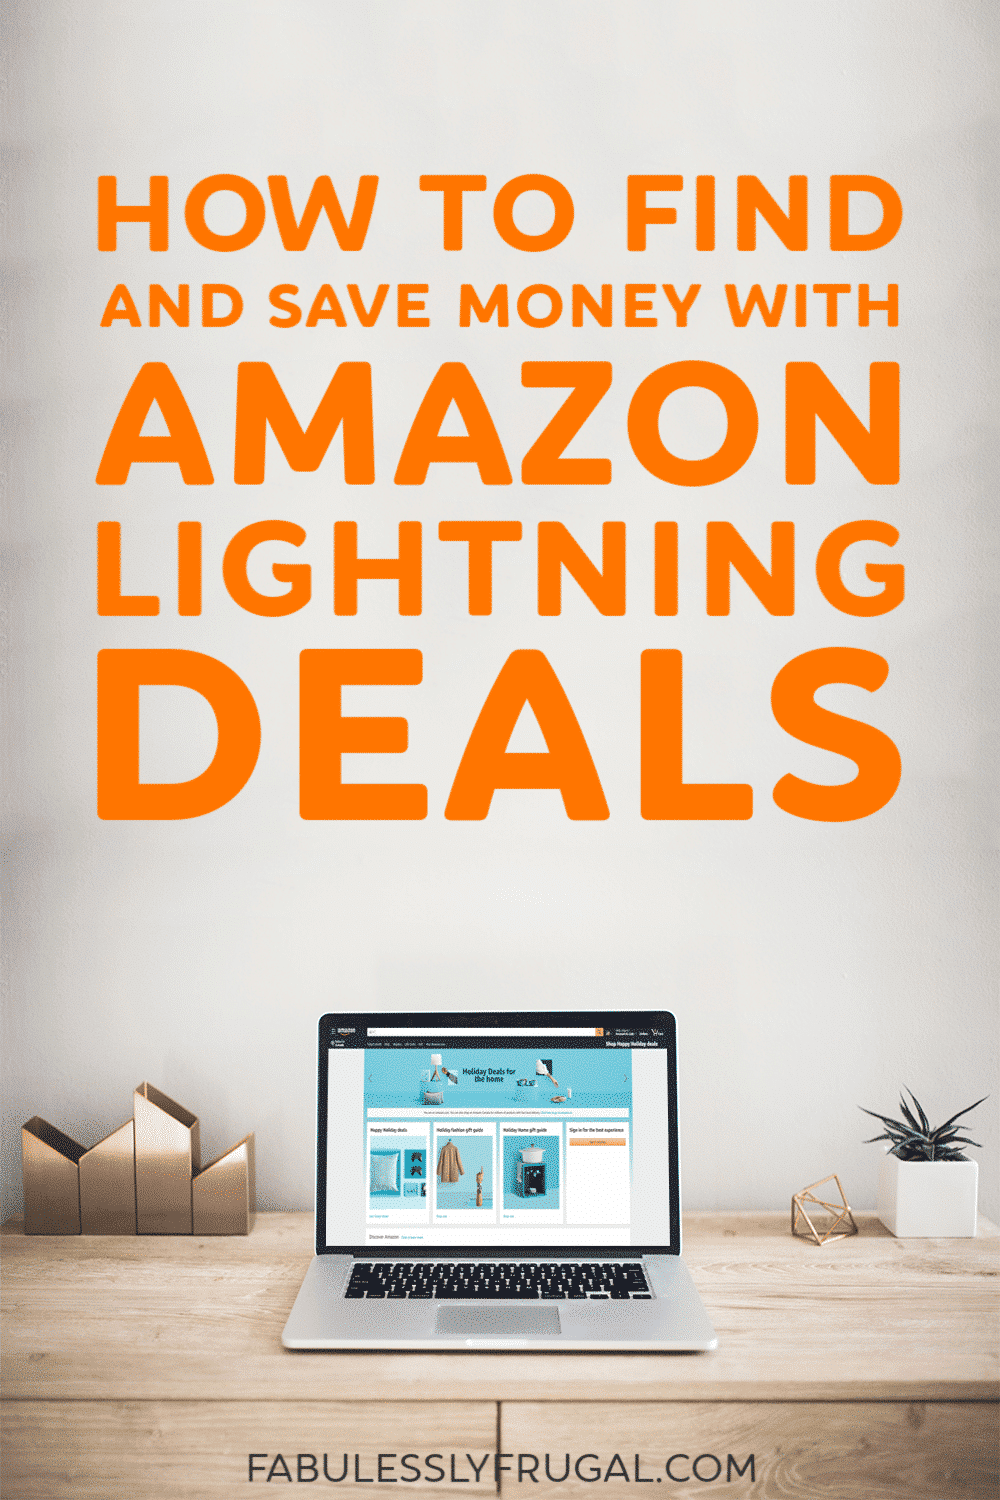 How to find Amazon lightning deals